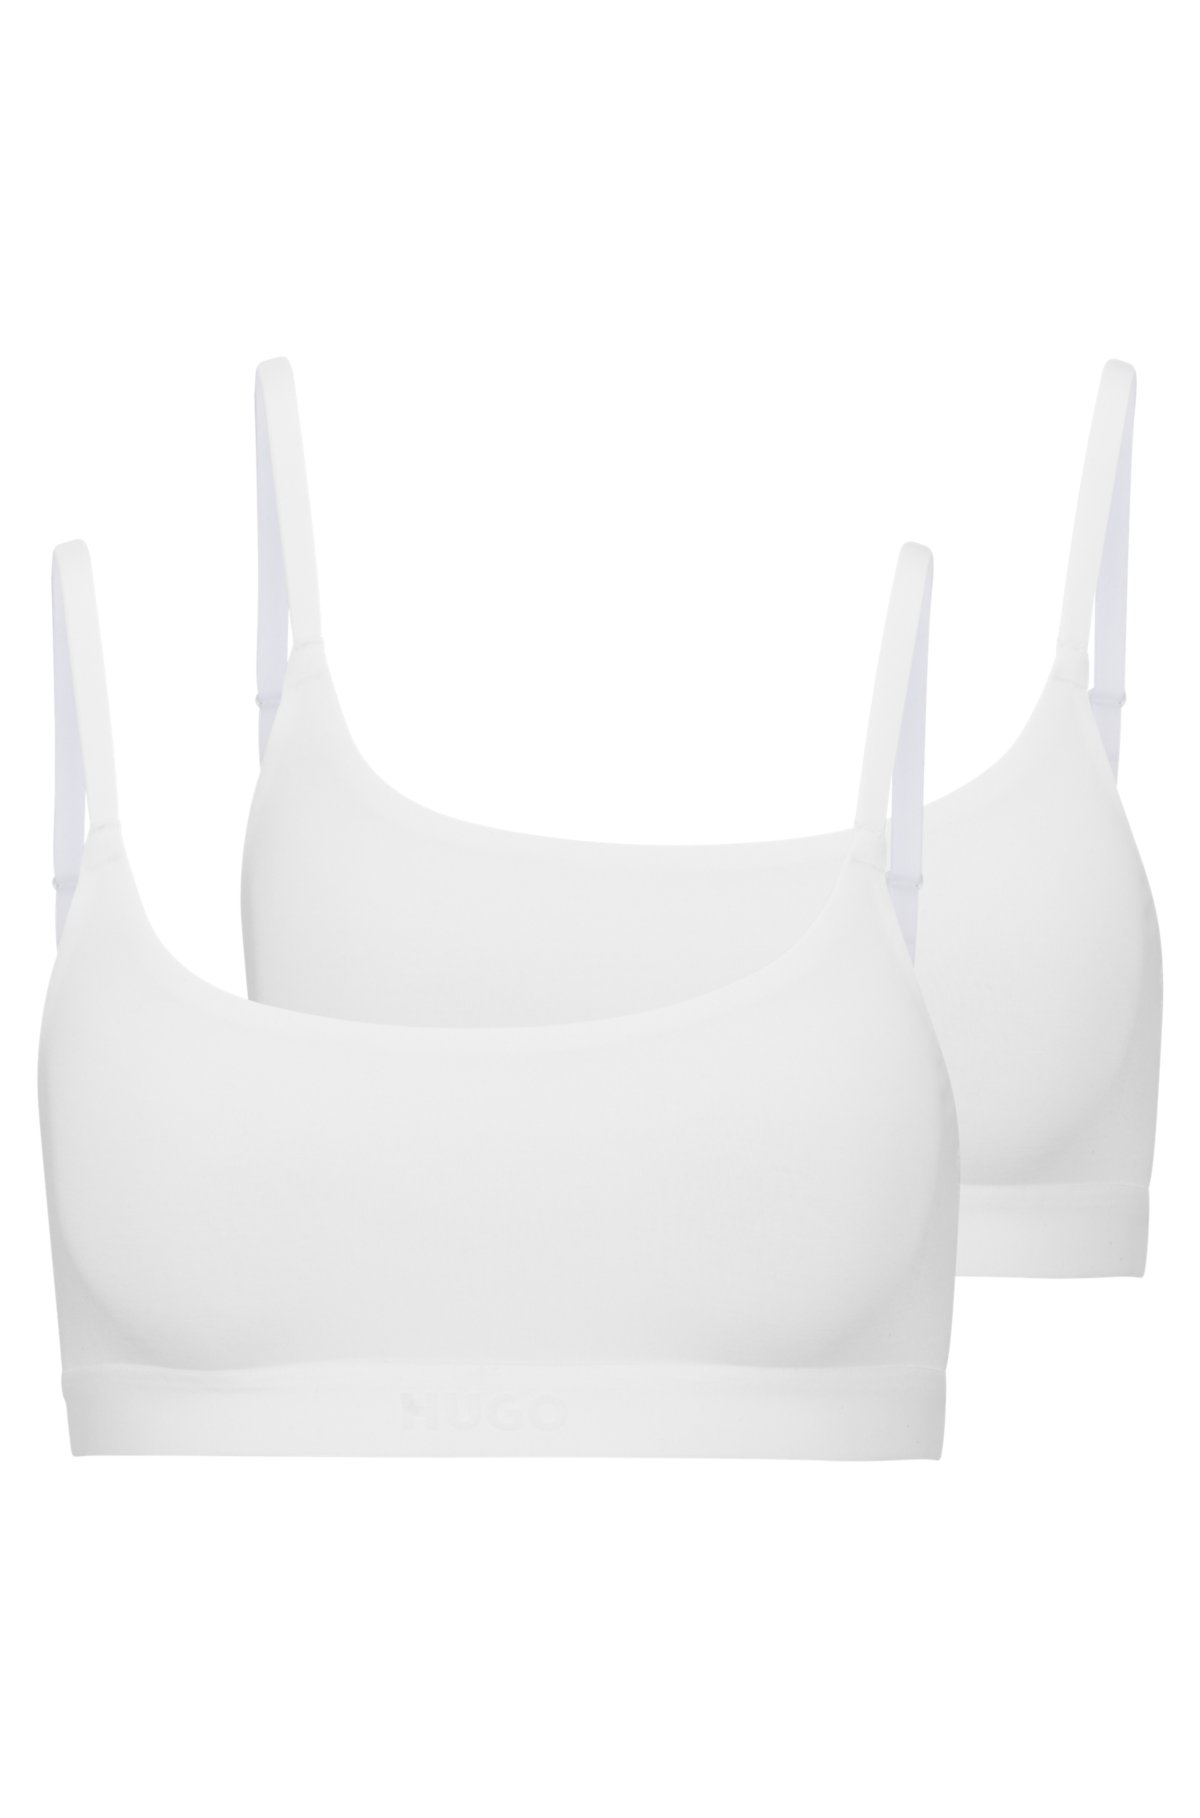 stretch-modal bralettes logo HUGO details with - of Two-pack